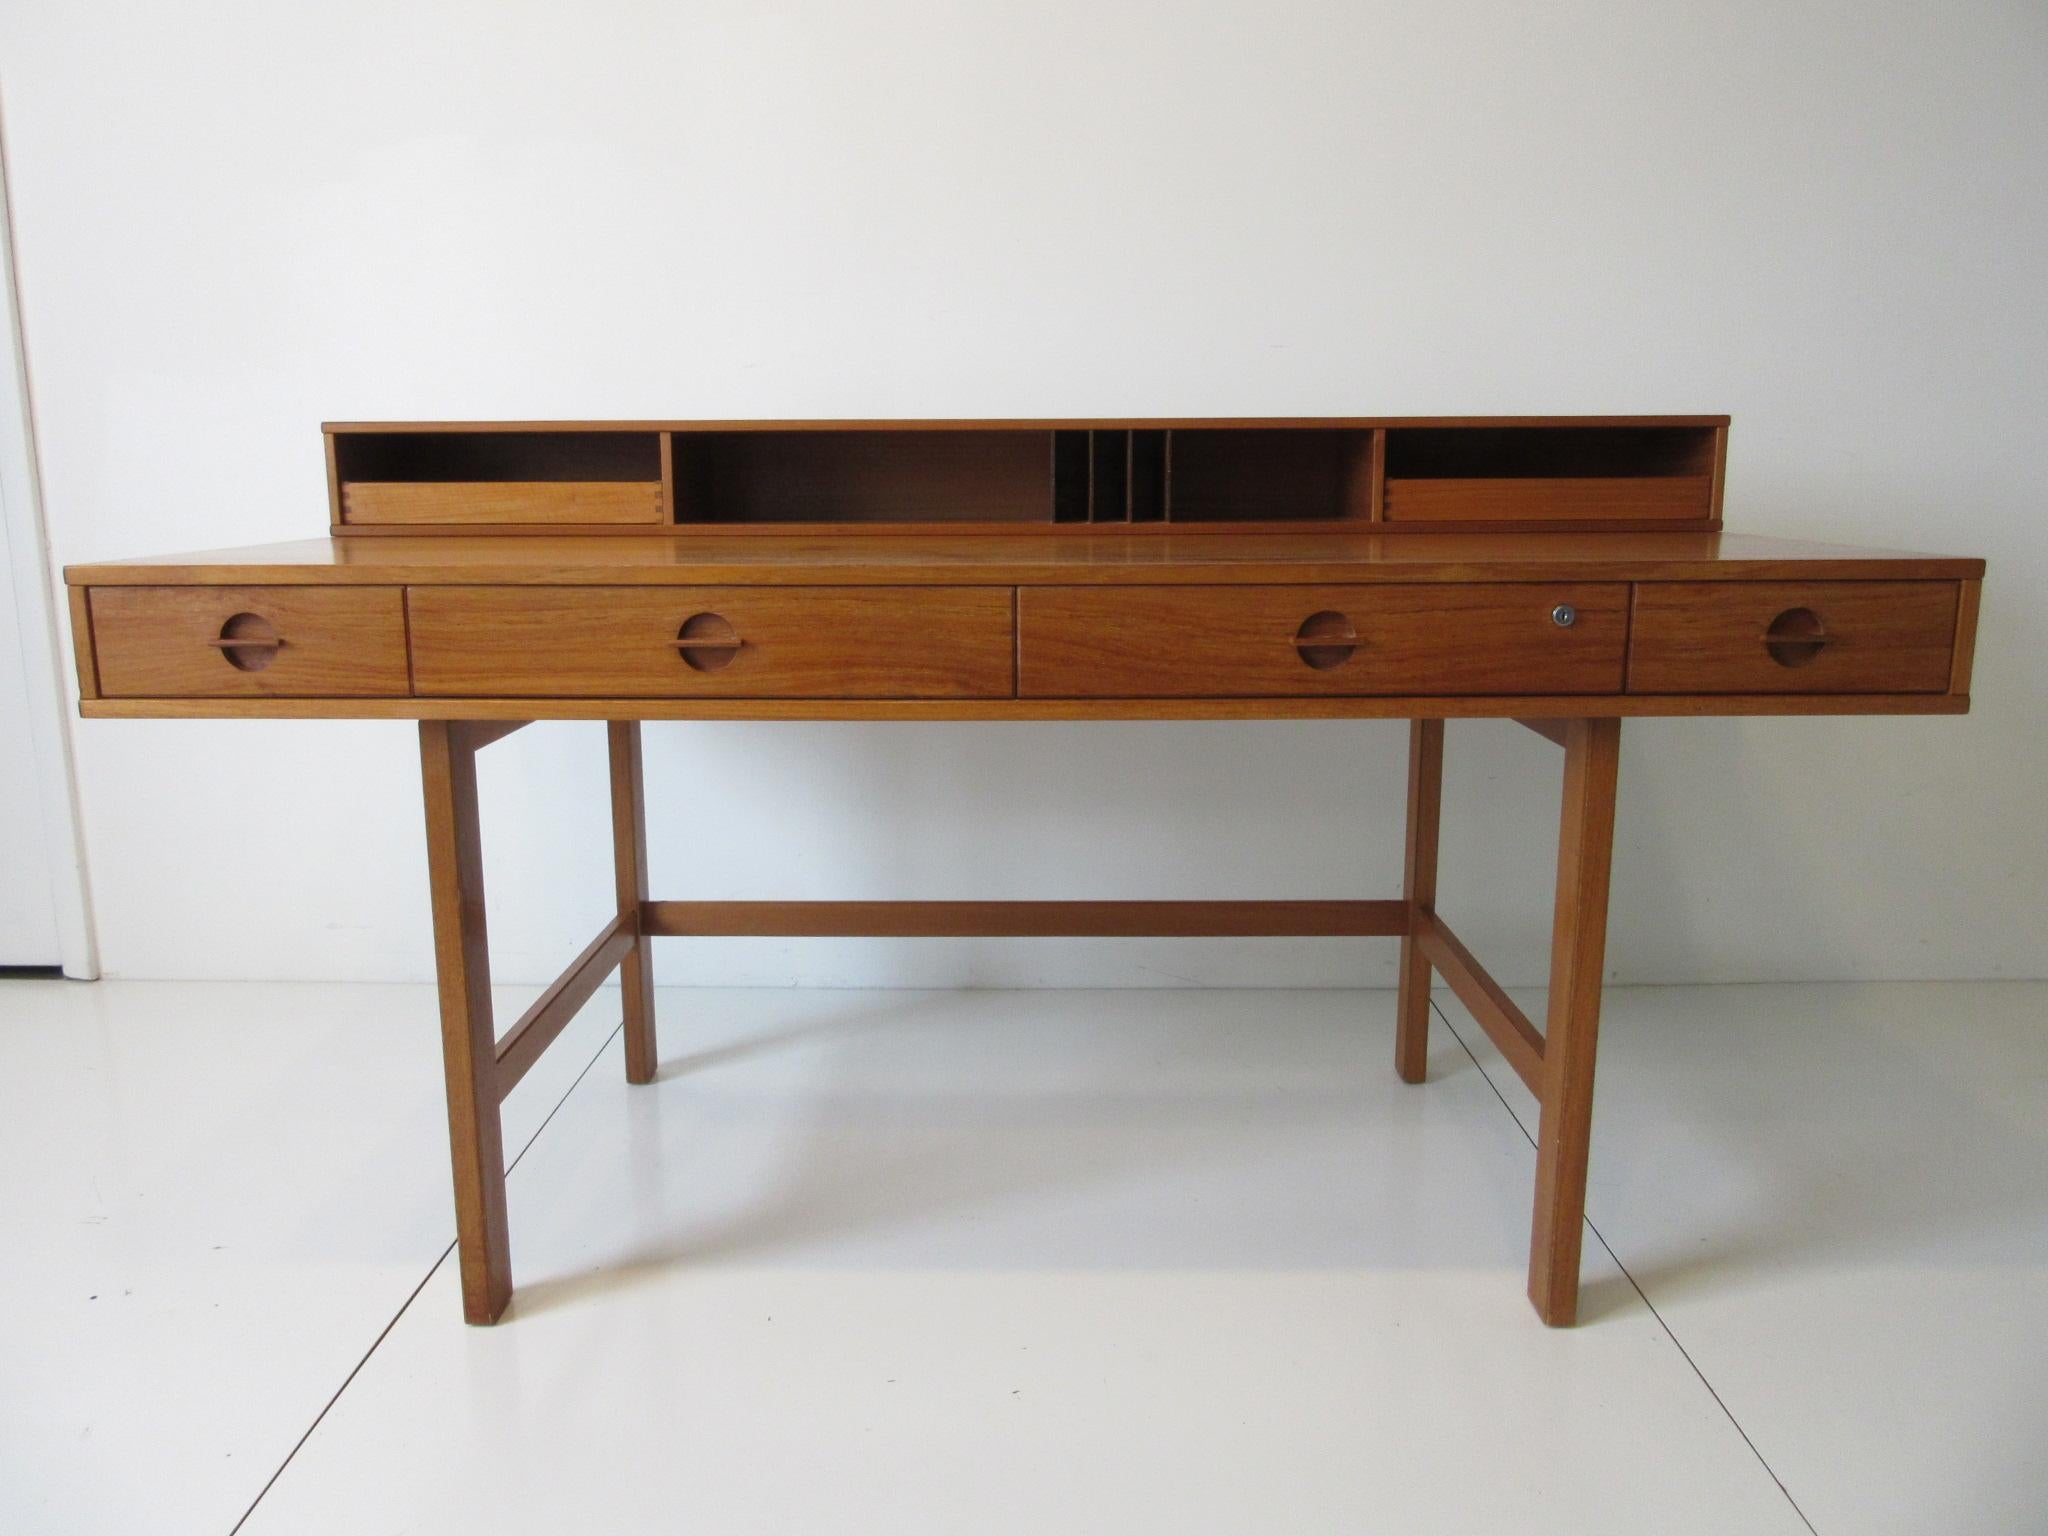 A wonderful well designed and Classic teak flip top desk with four front drawers having built in matching pulls, two upper slide out storage drawers, letter compartment and bins. The back side has three open storage bins and when the back side is